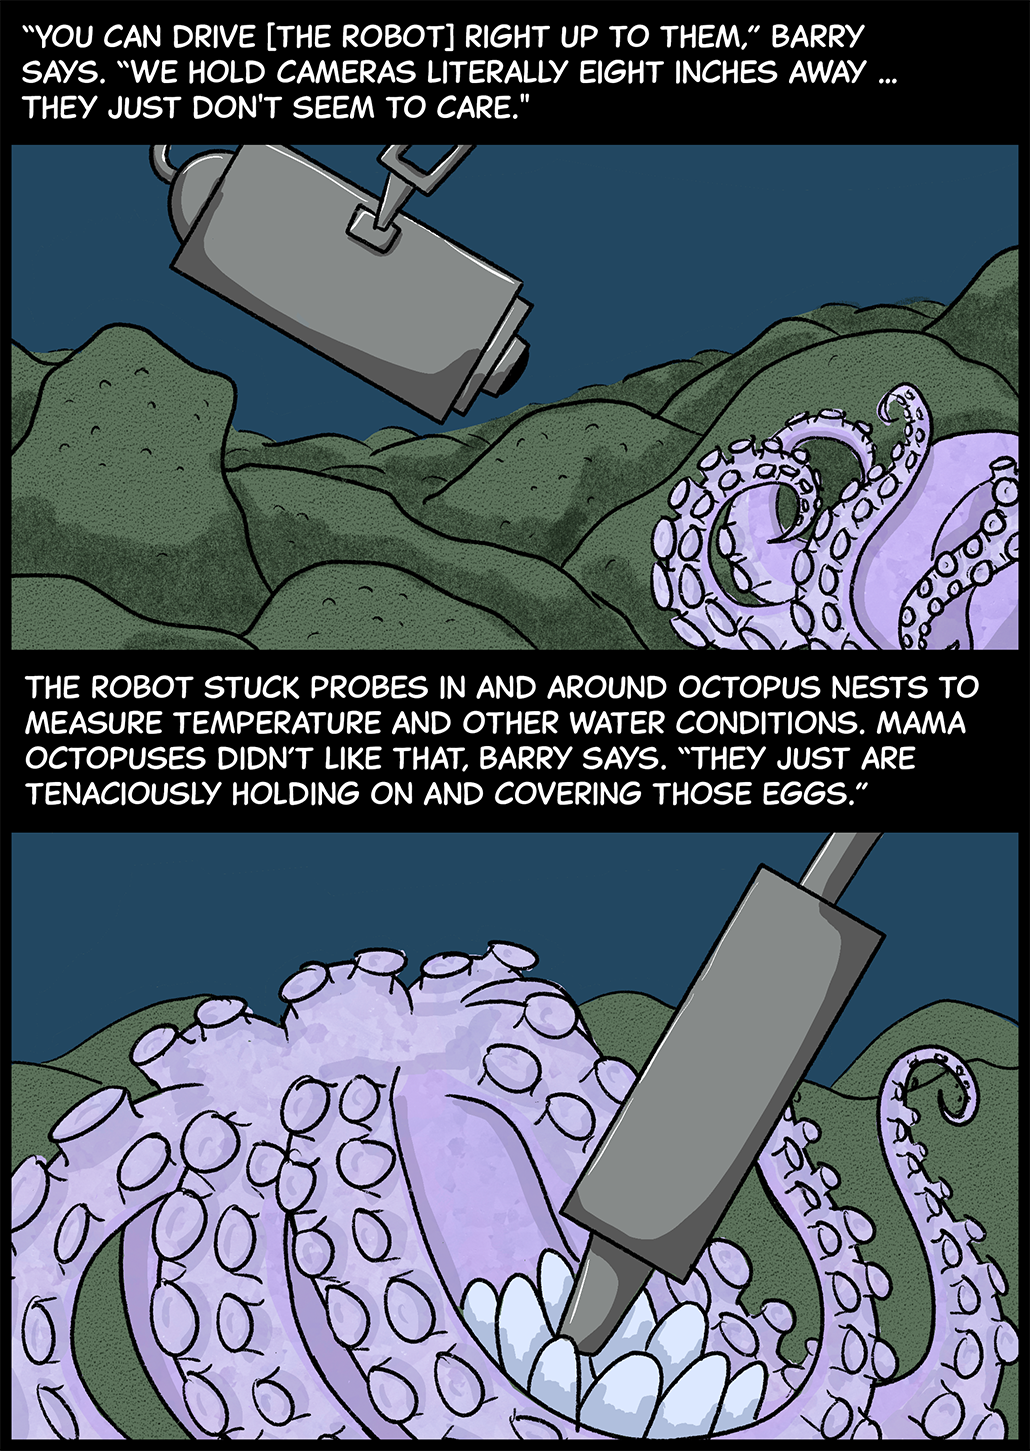 Text (above first image): “You can drive [the robot] right up to them,” Barry says. “We hold cameras literally eight inches away. … They just don’t seem to care.” First image: A camera hovers inches away from a pearl octopus sitting on the seafloor with its arms folded up around its body. Text (above second image): The robot stuck probes in and around octopus nests to measure temperature and other water conditions. Mama octopuses didn’t like that, Barry says. “They just are tenaciously holding on and covering those eggs.” Second image: a gray, cylindrical probe pokes into the cluster of eggs tucked against a mother octopus’s side on the seafloor.